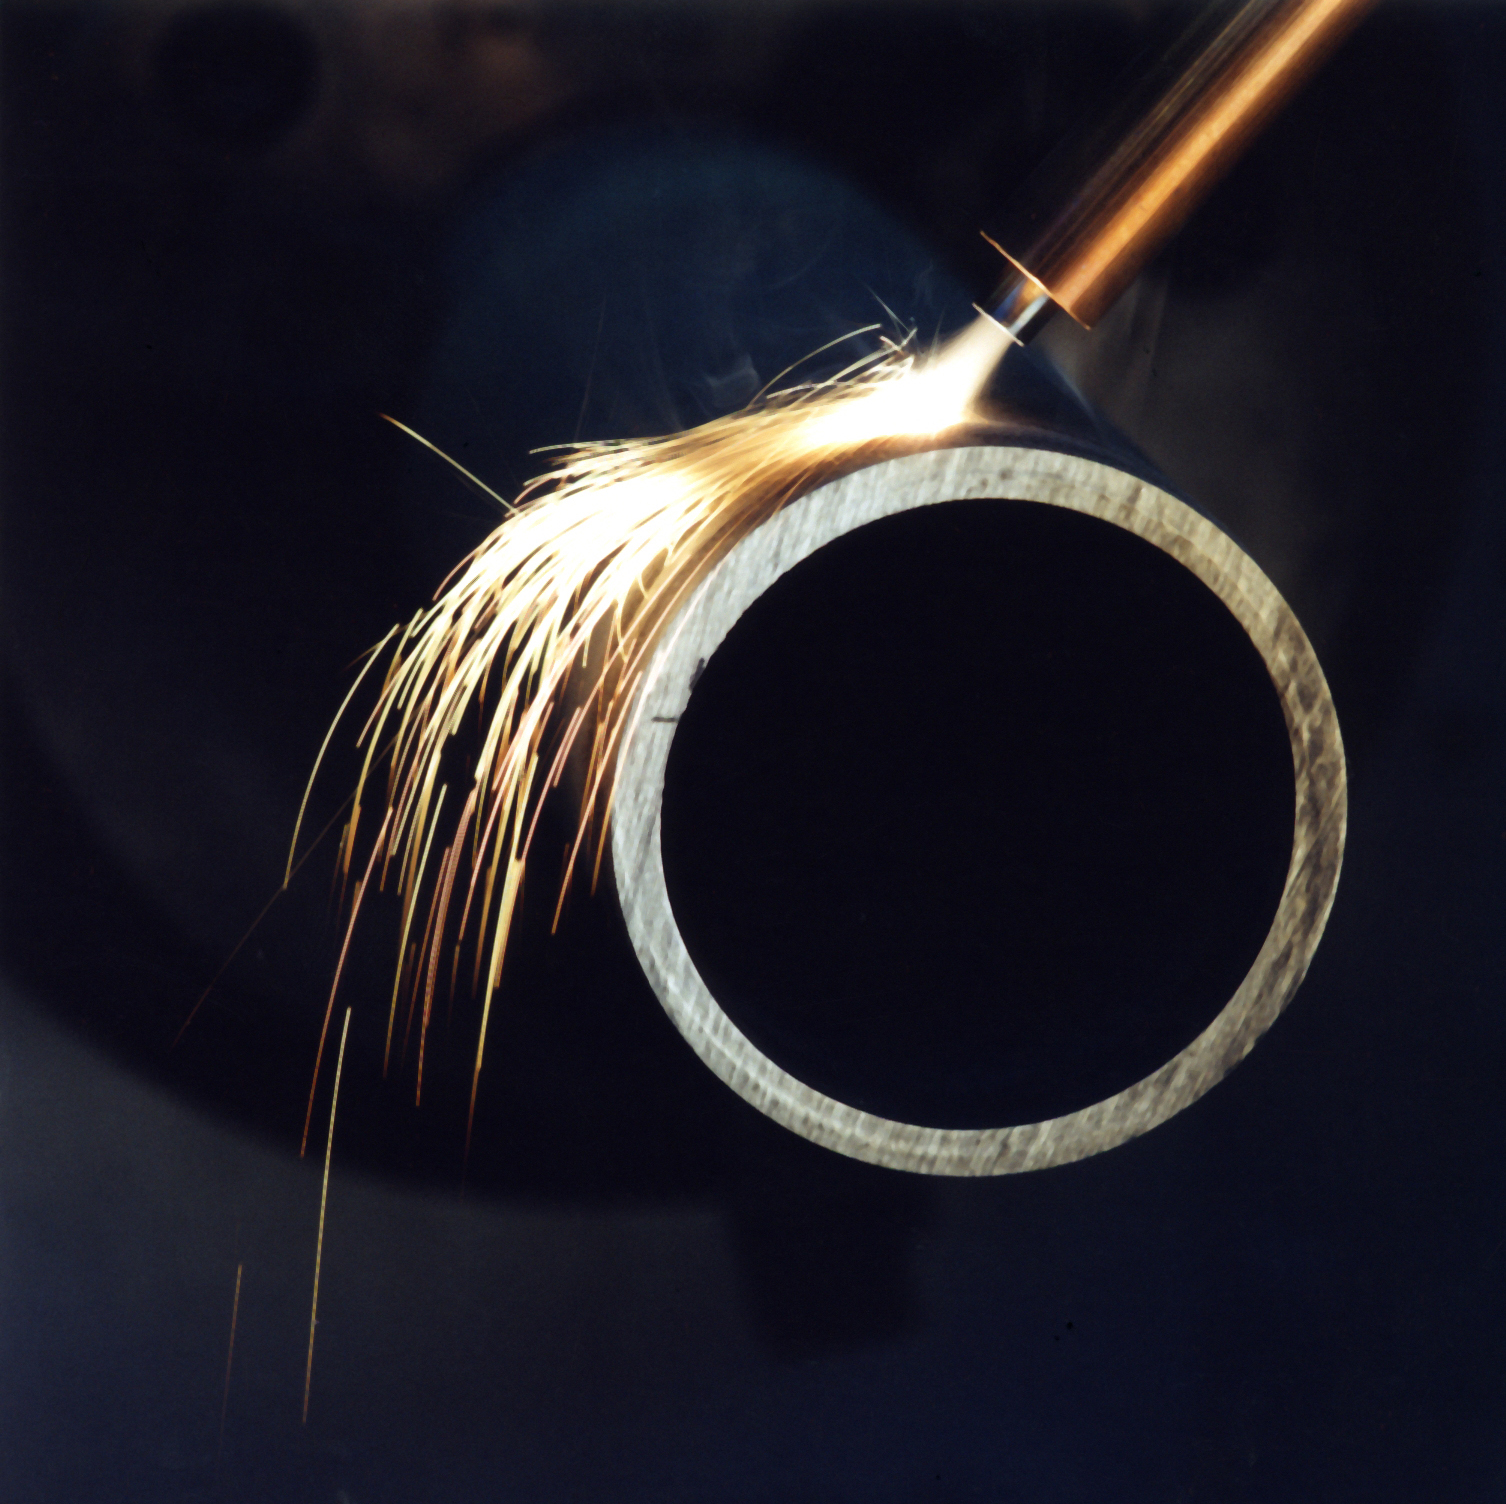 Processing of a workpiece by laser